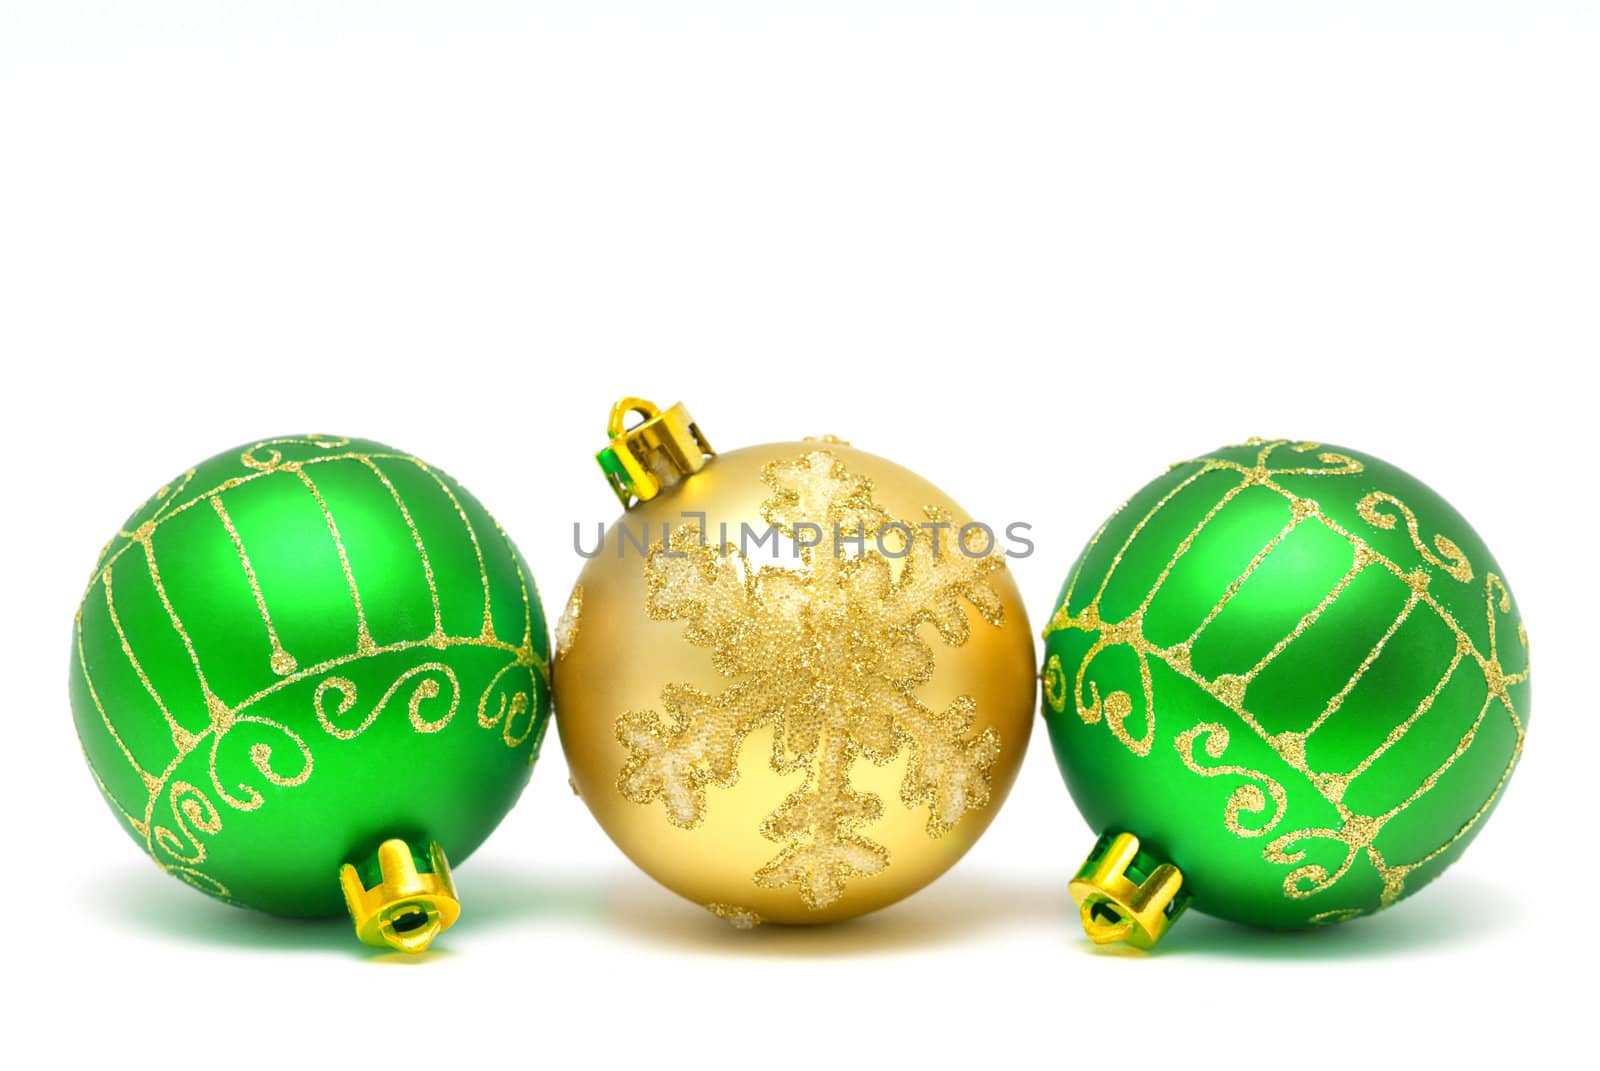 Christmas decorations - balls on a white background with space for text